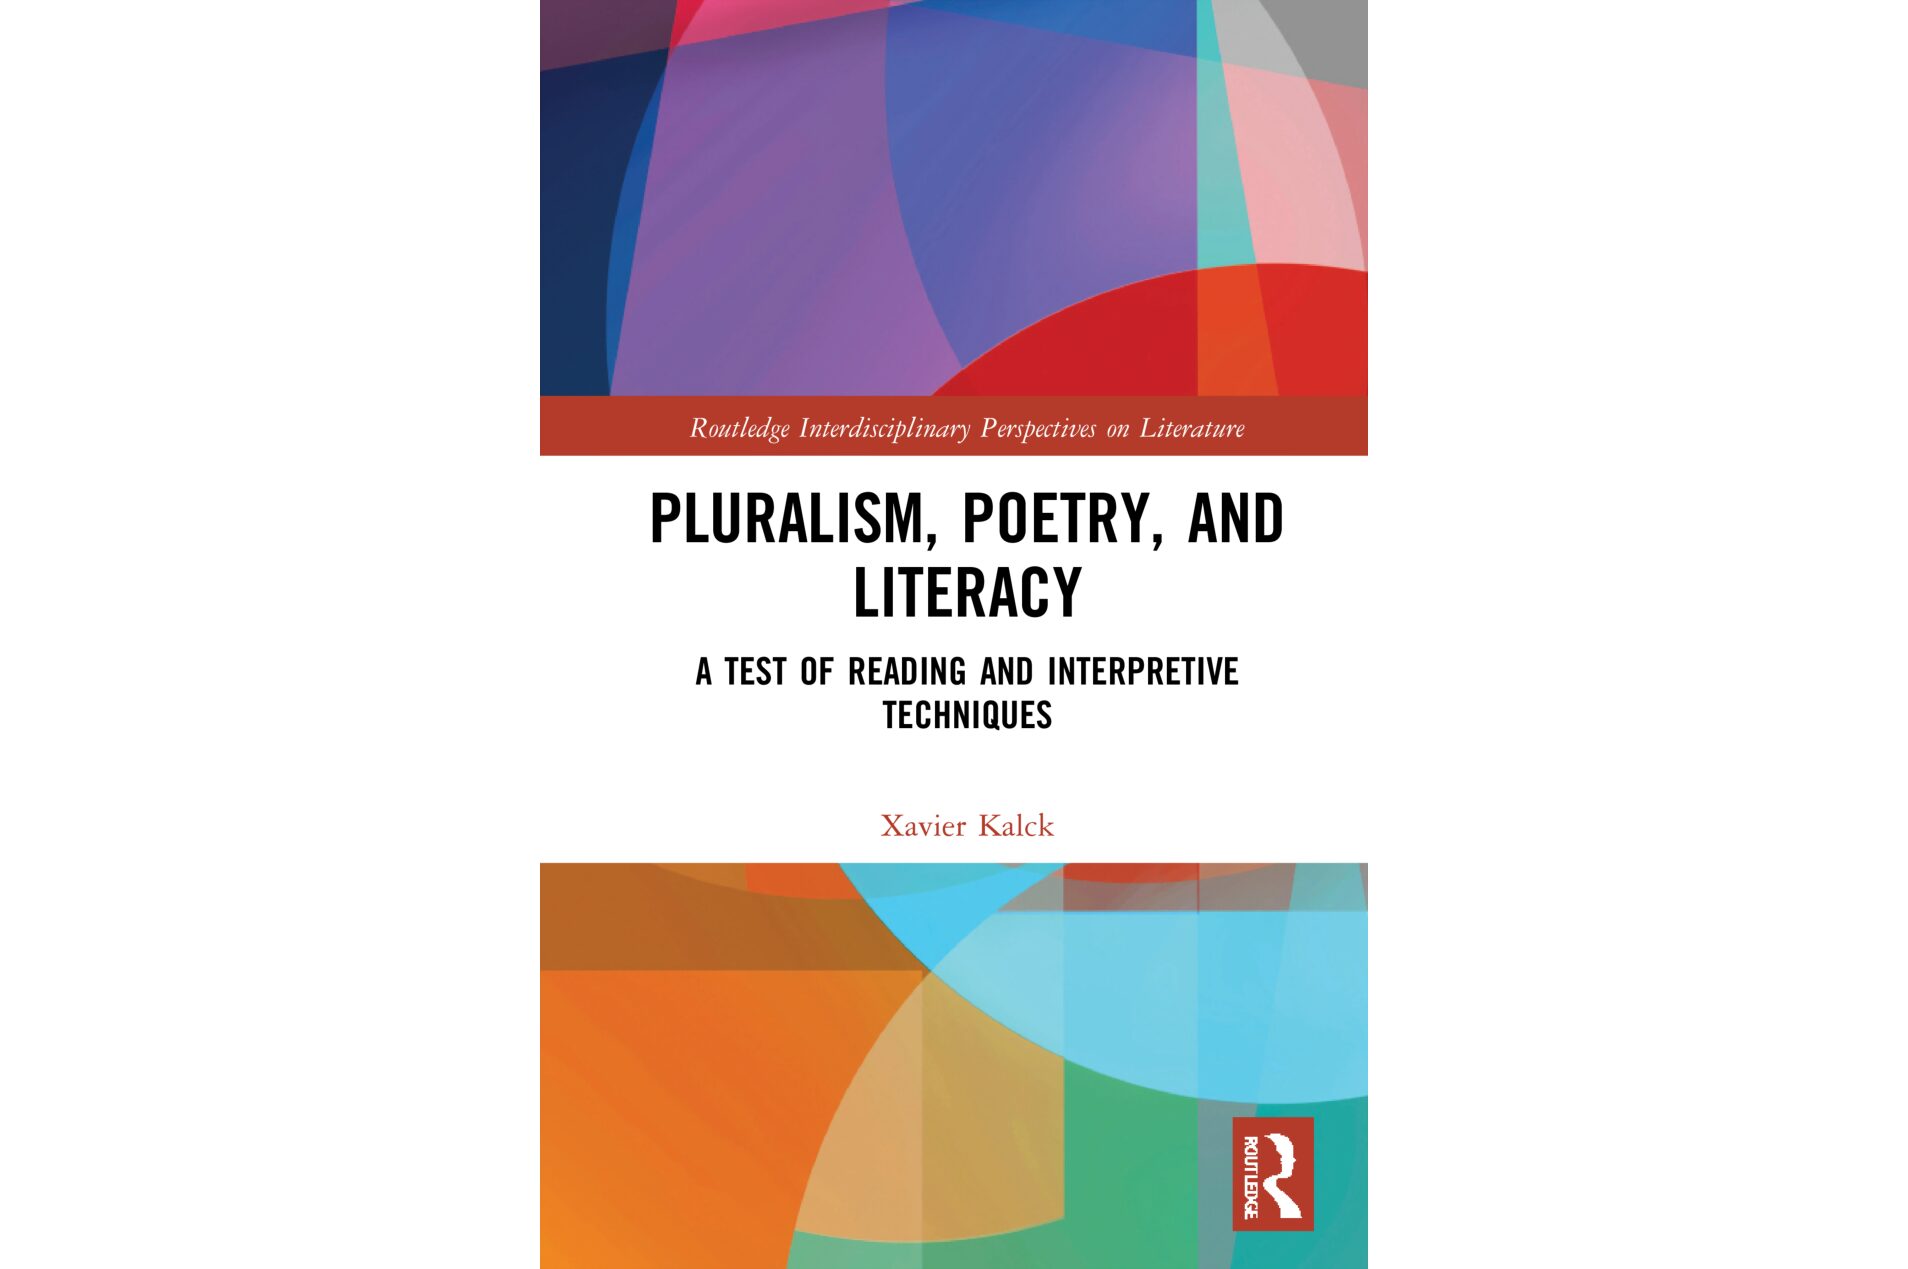 PAR: X. Kalck, « Pluralism, Poetry, and Literacy. A Test of Reading and Interpretive Techniques », Routledge, 2021.